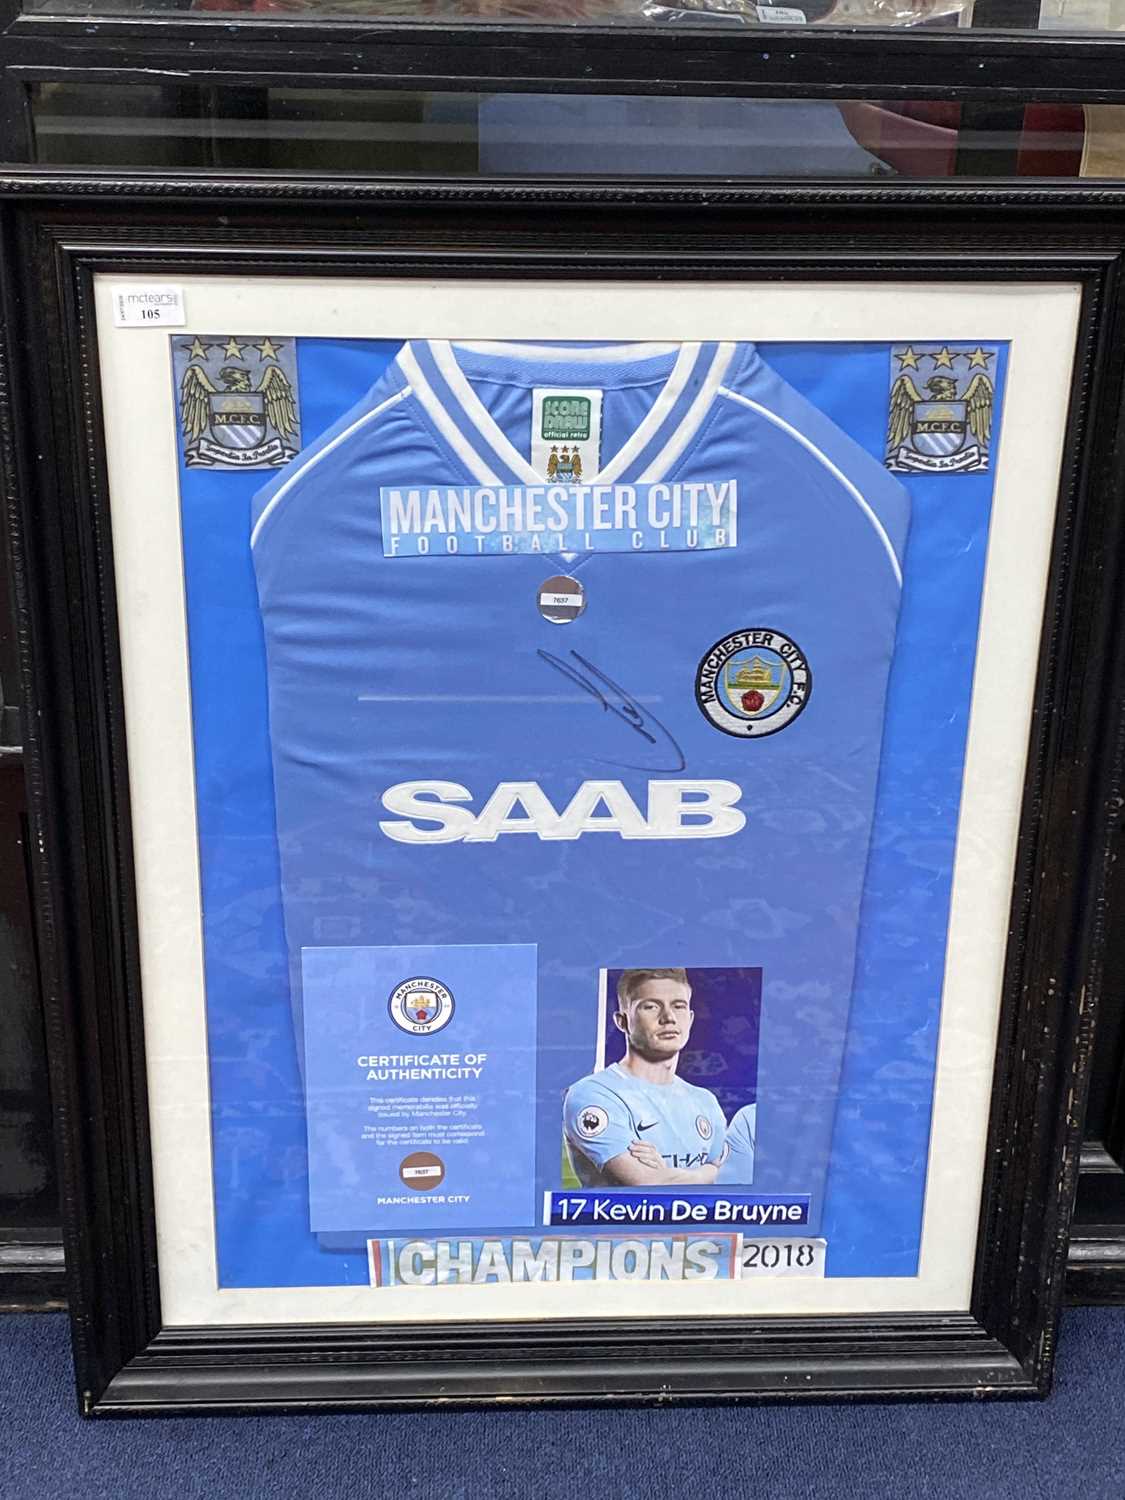 Lot 105 - A SIGNED MANCHESTER CITY FOOTBALL CLUB JERSEY